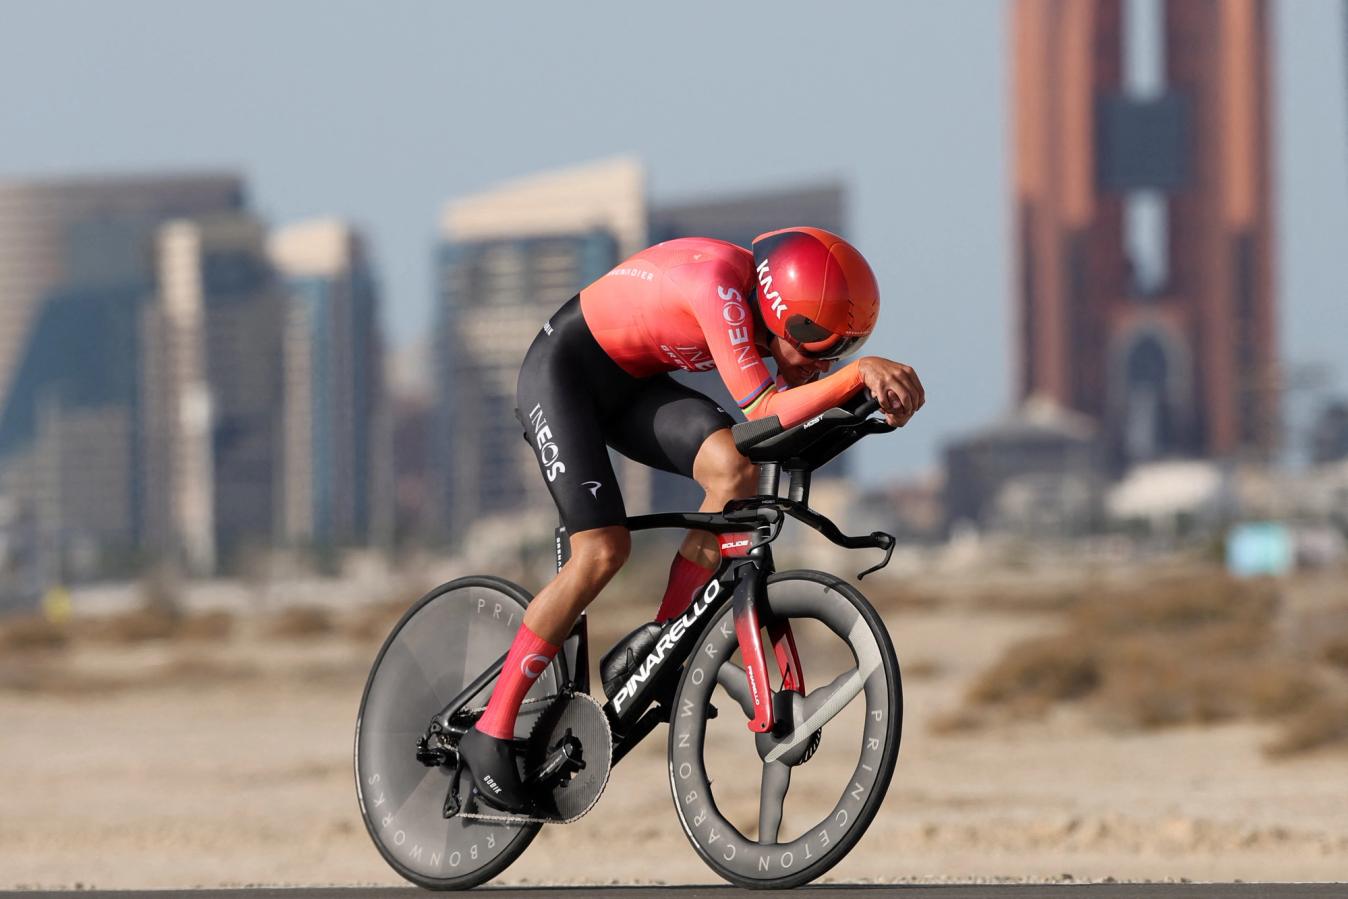 Foss made waves at the UAE Tour when he sported a 68-tooth chainring during the individual time trial